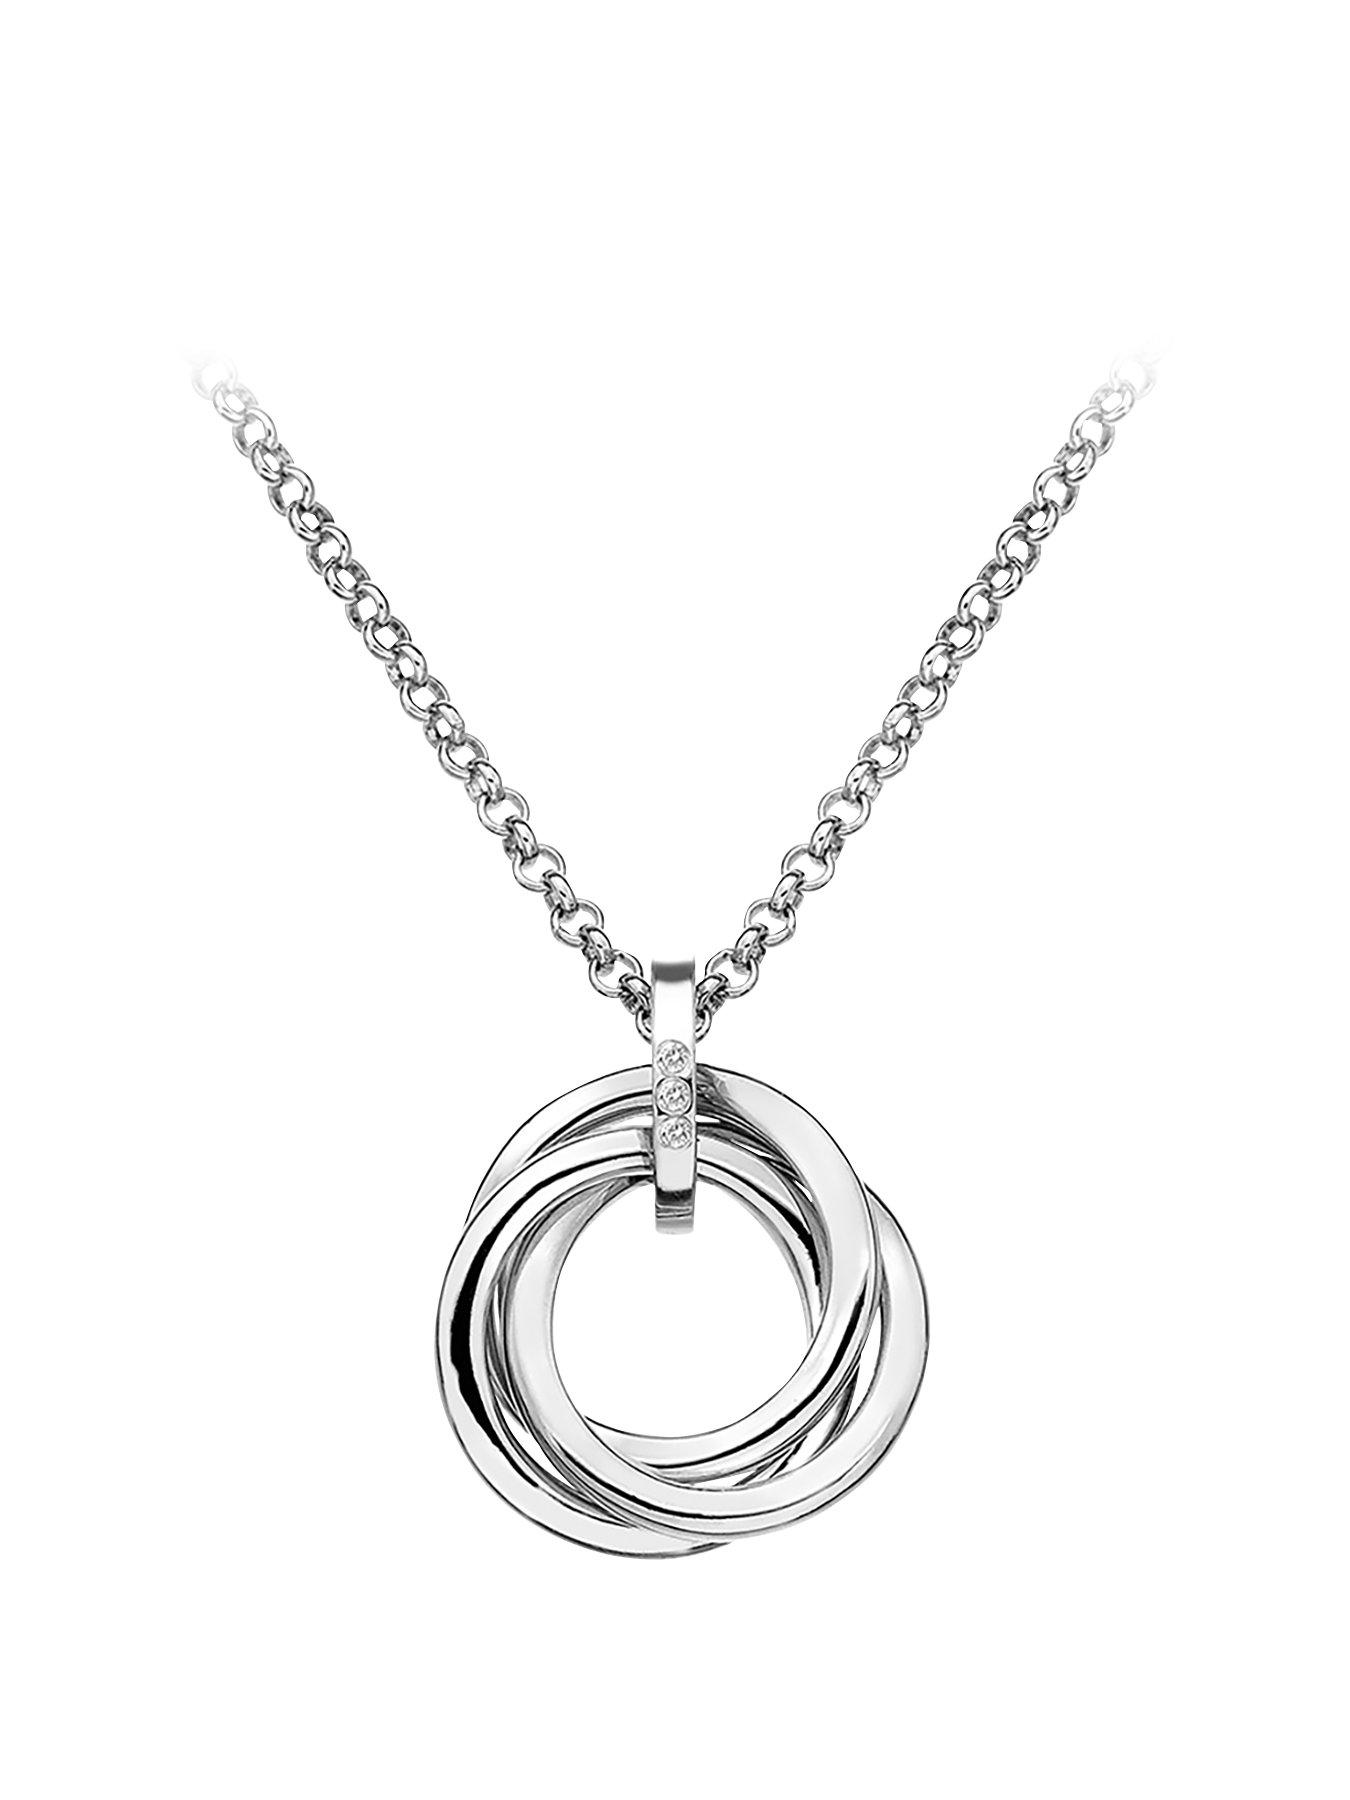 Aooaz Jewelry Pendant Necklaces for Men Women Silver Material Necklace Round Bead Chain Chain Necklace 